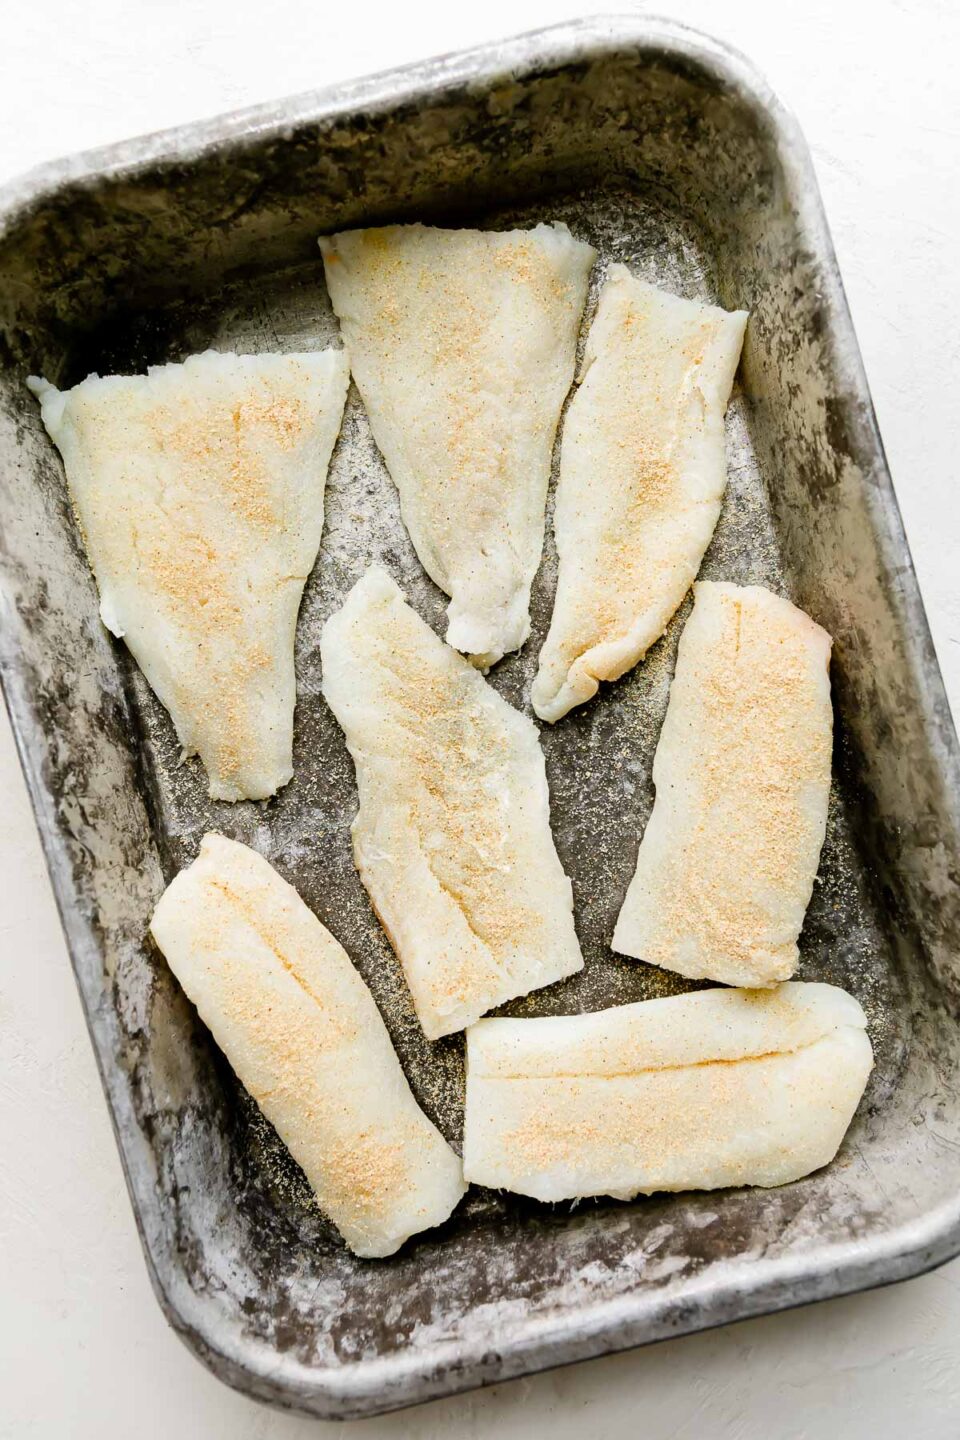 Prepared and seasoned cod fillets are arranged atop a metal baking sheet pan. The pan rests atop a creamy white textured surface.